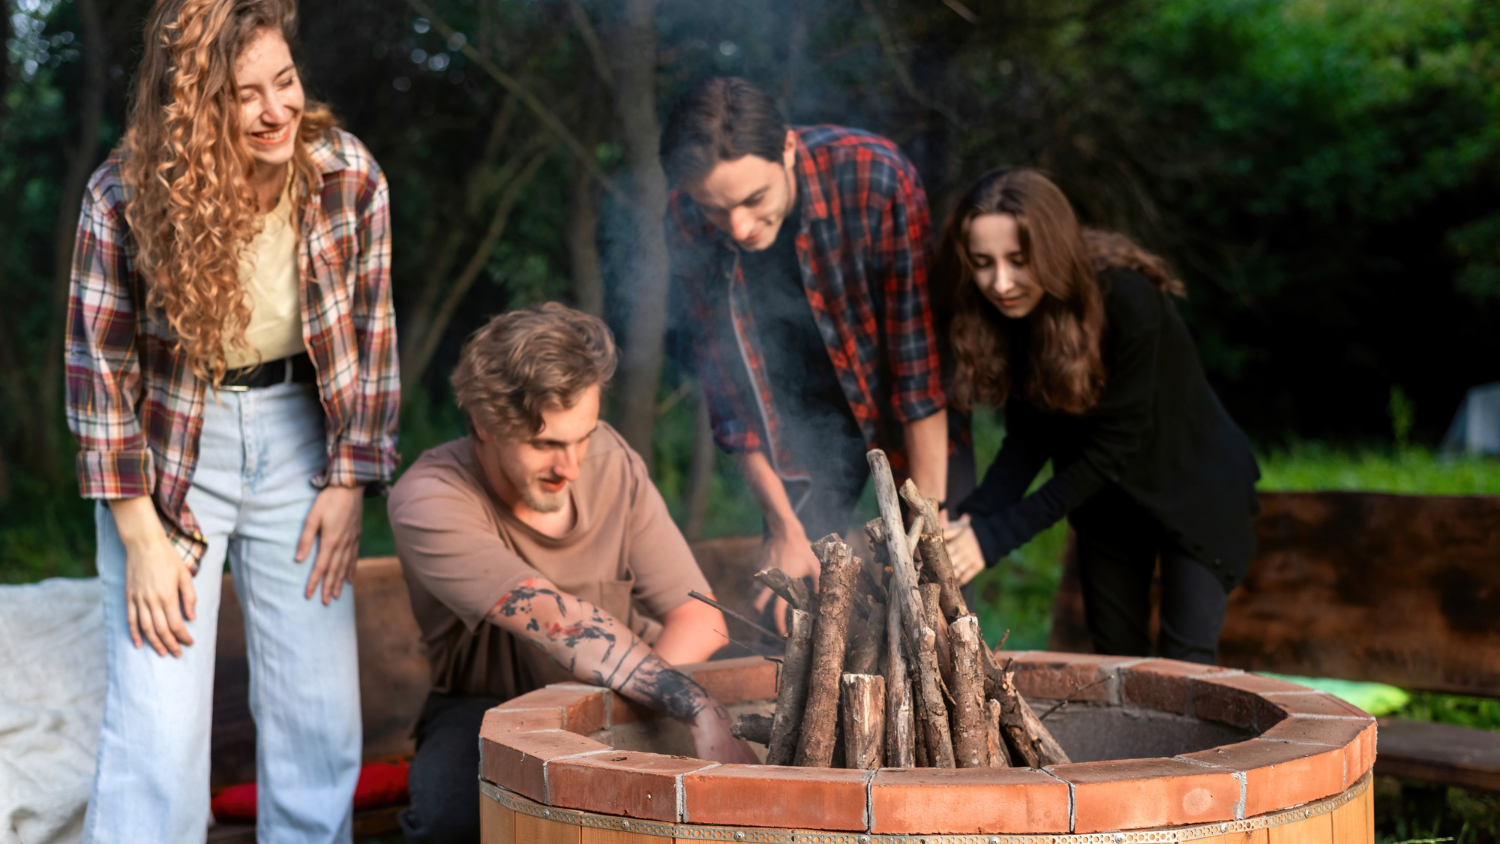 A group of four friends arranging wood in a brick fire pit in a green backyard, with one man kneeling and others standing, smoke rising, in casual attire, enjoying outdoor activities together.